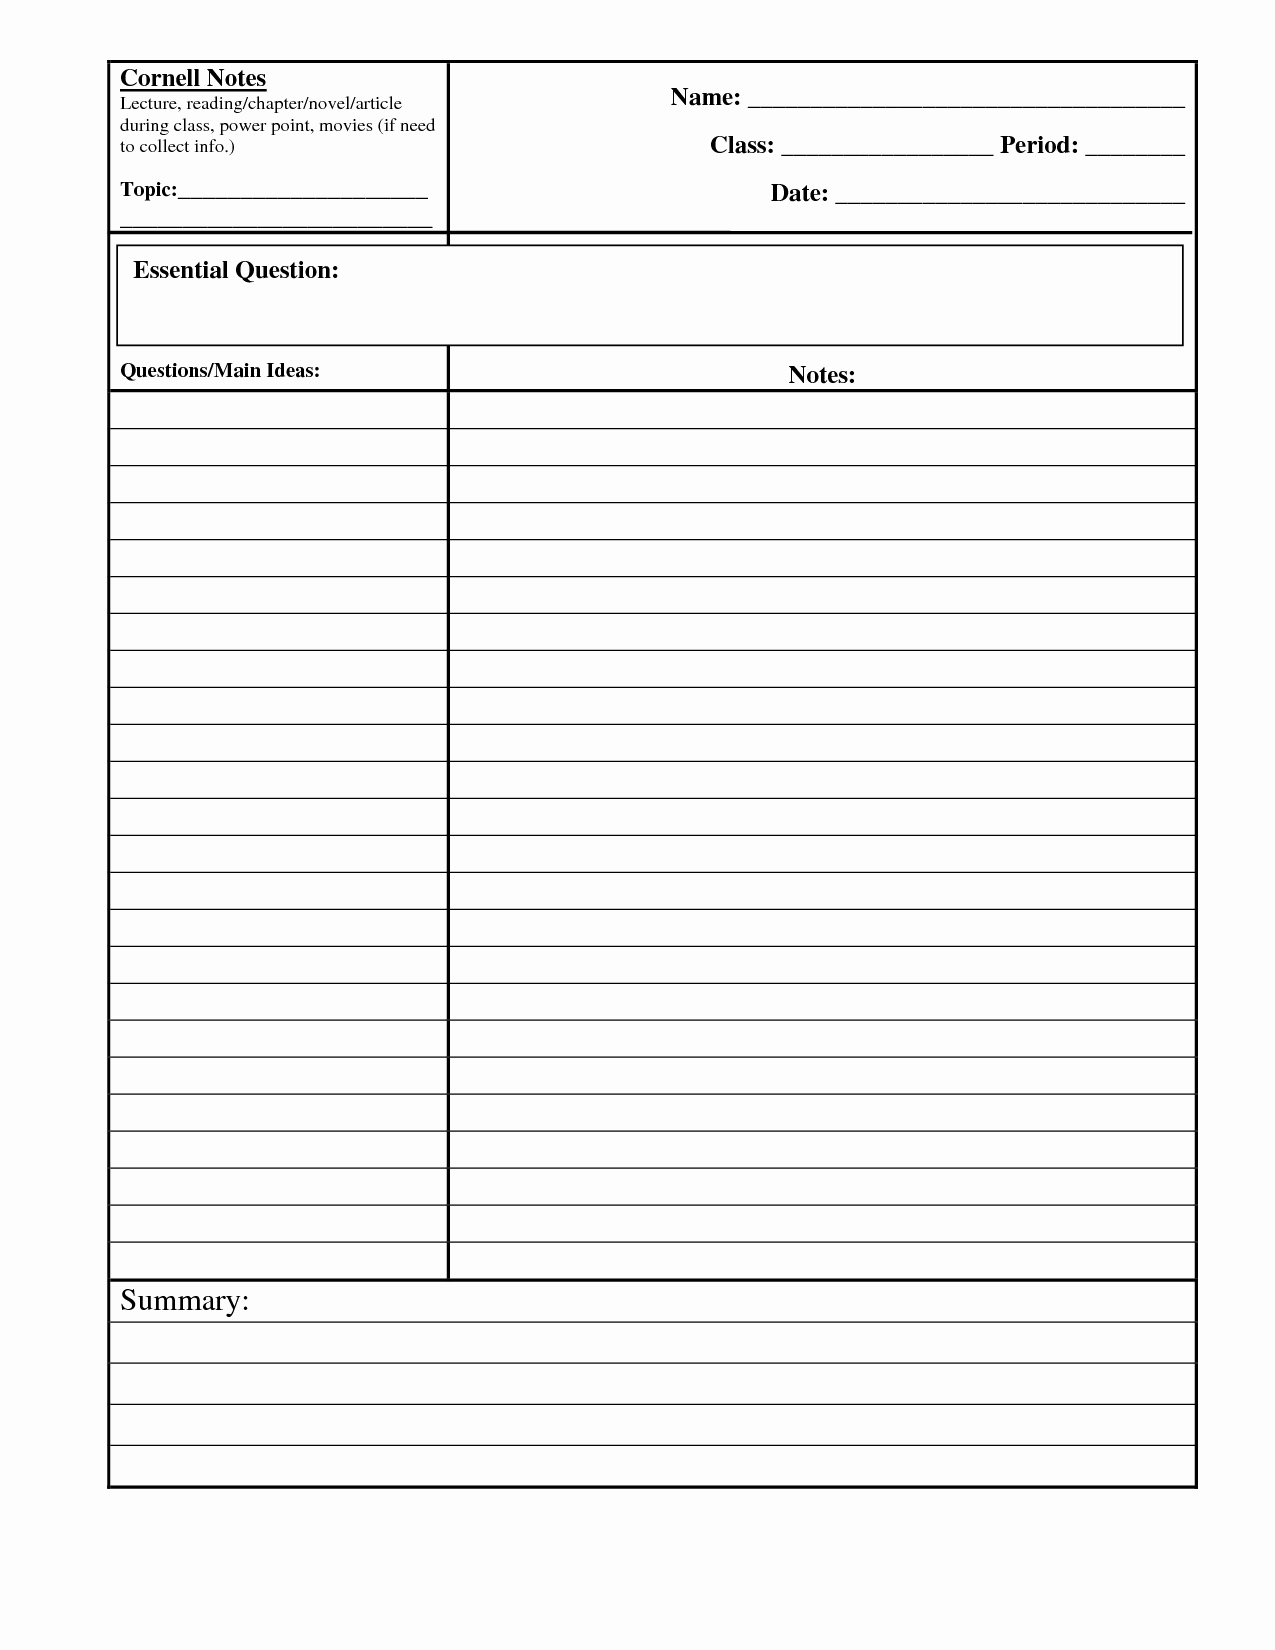 Cornell Notes Template Download Unique Microsoft Word Note Taking Template